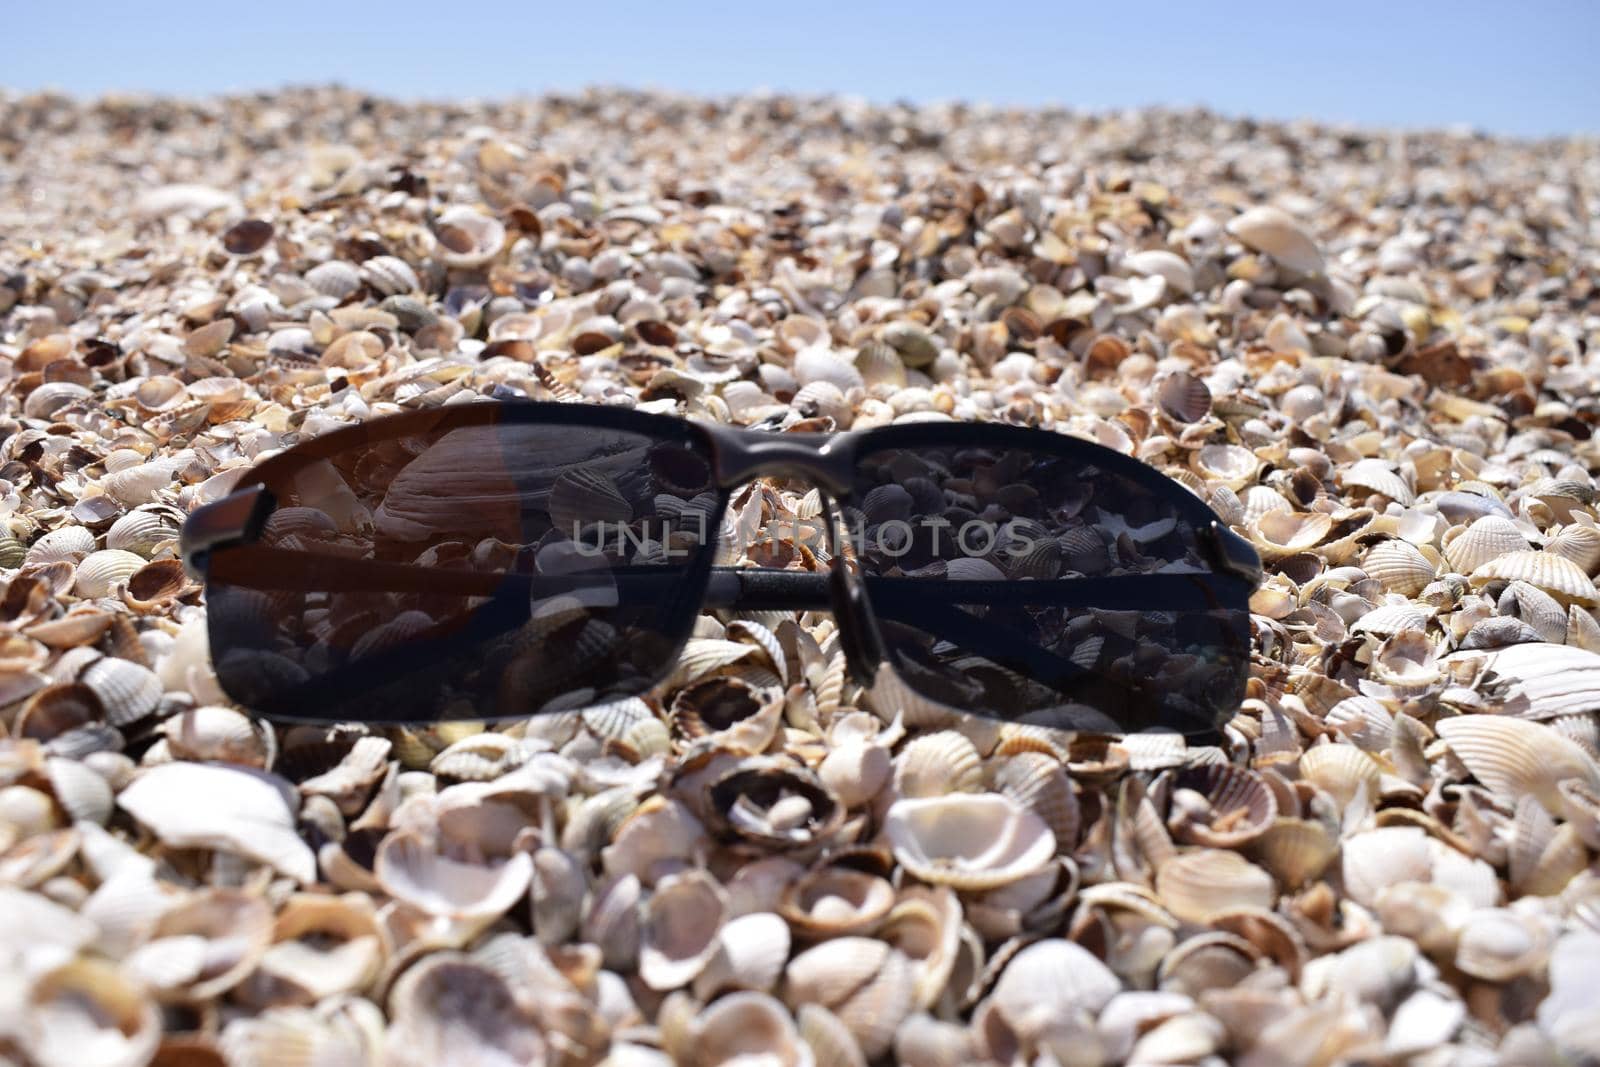 The sunglasses lying on the seashore against the sea. Close up view sunglasses on a sand beach with shells as an elements. Summer vacation concept, accessories for summer beach travel at holidays.